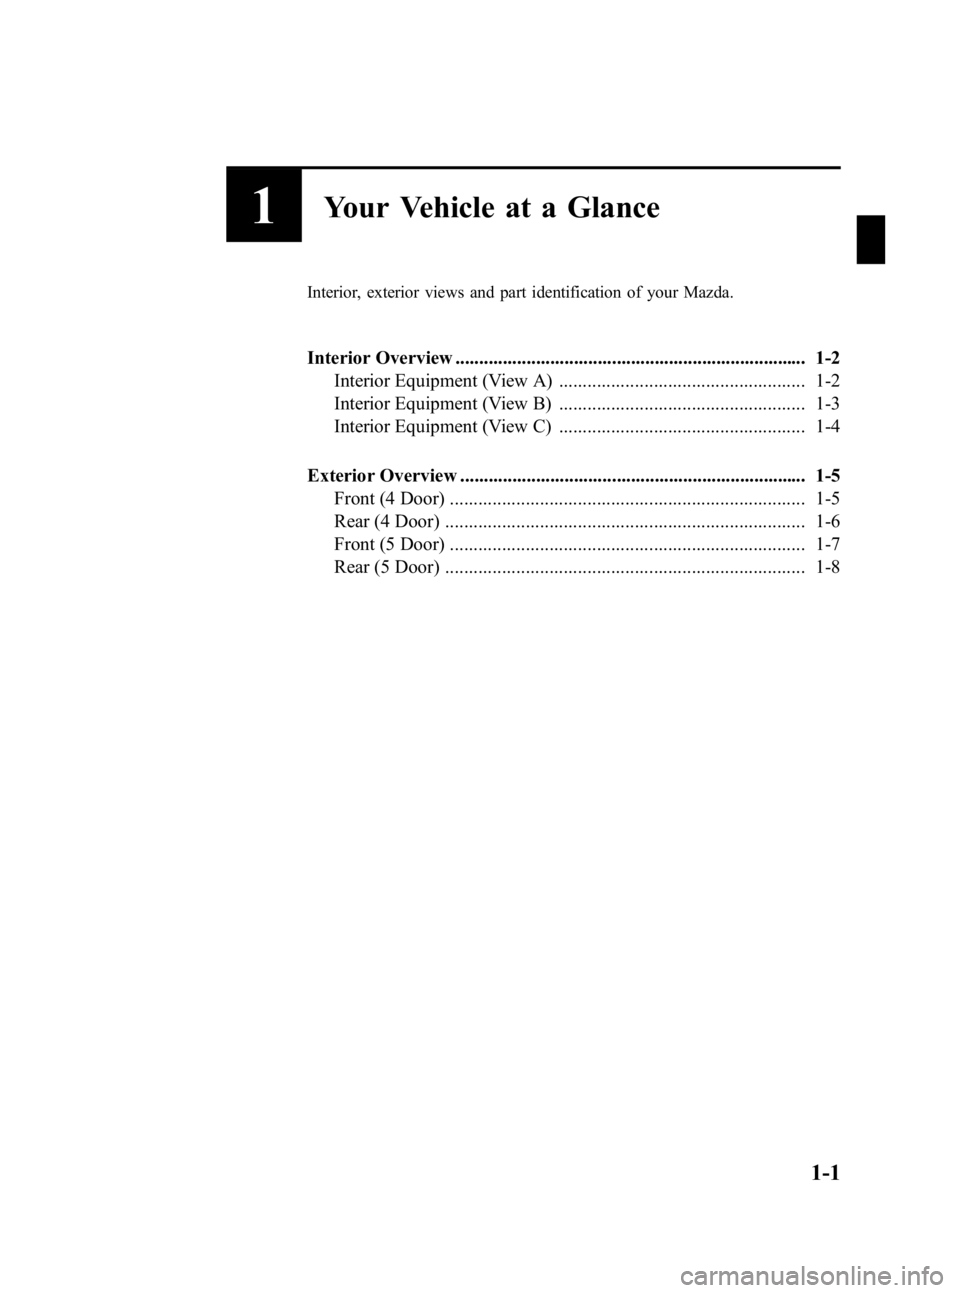 MAZDA MODEL 3 5-DOOR 2010  Owners Manual Black plate (7,1)
1Your Vehicle at a Glance
Interior, exterior views and part identification of your Mazda.
Interior Overview ..........................................................................